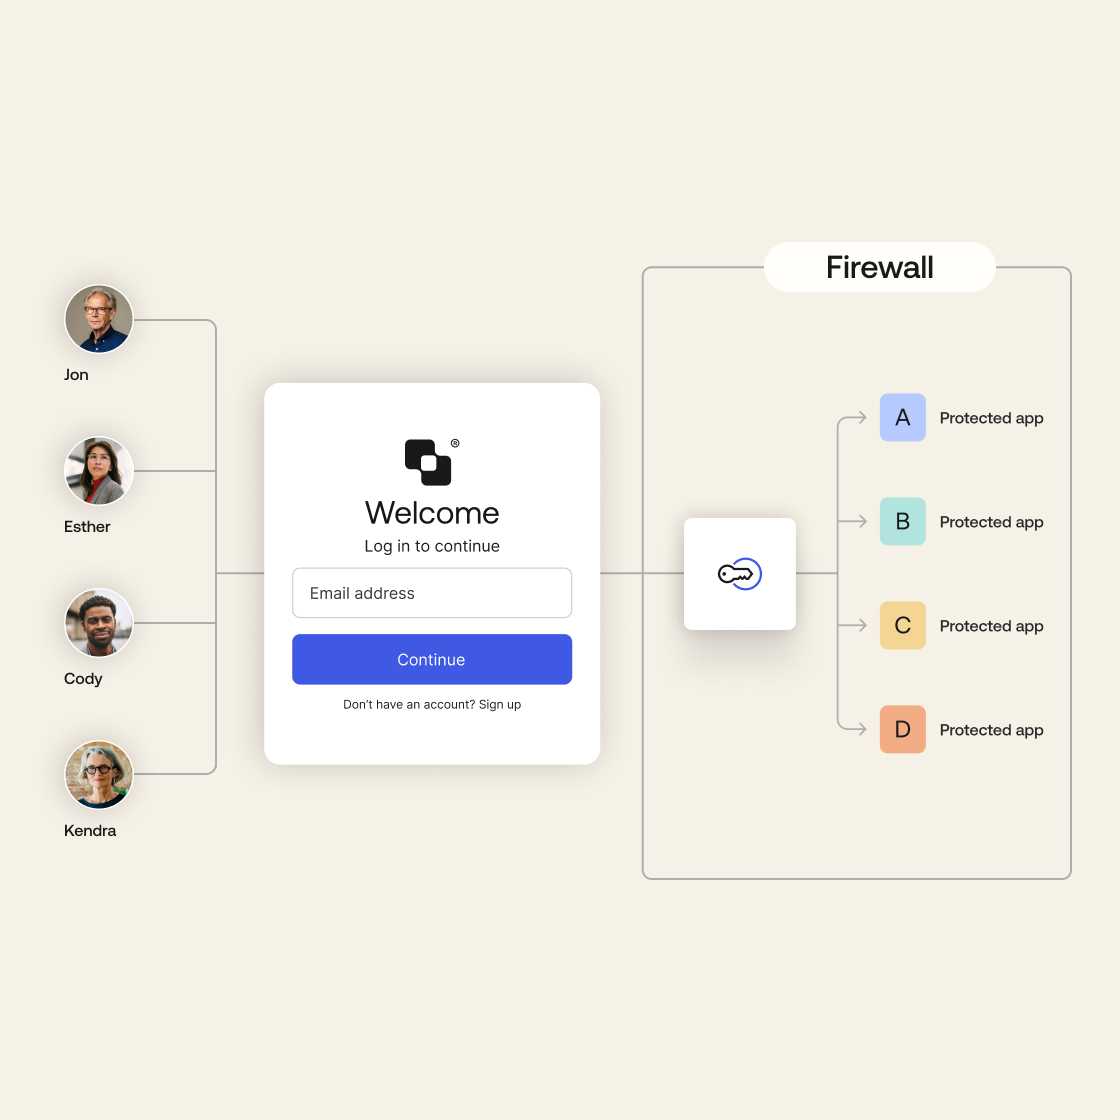  A graphic of four avatars connected to a login screen connected to a locked firewall, represented by a key icon.